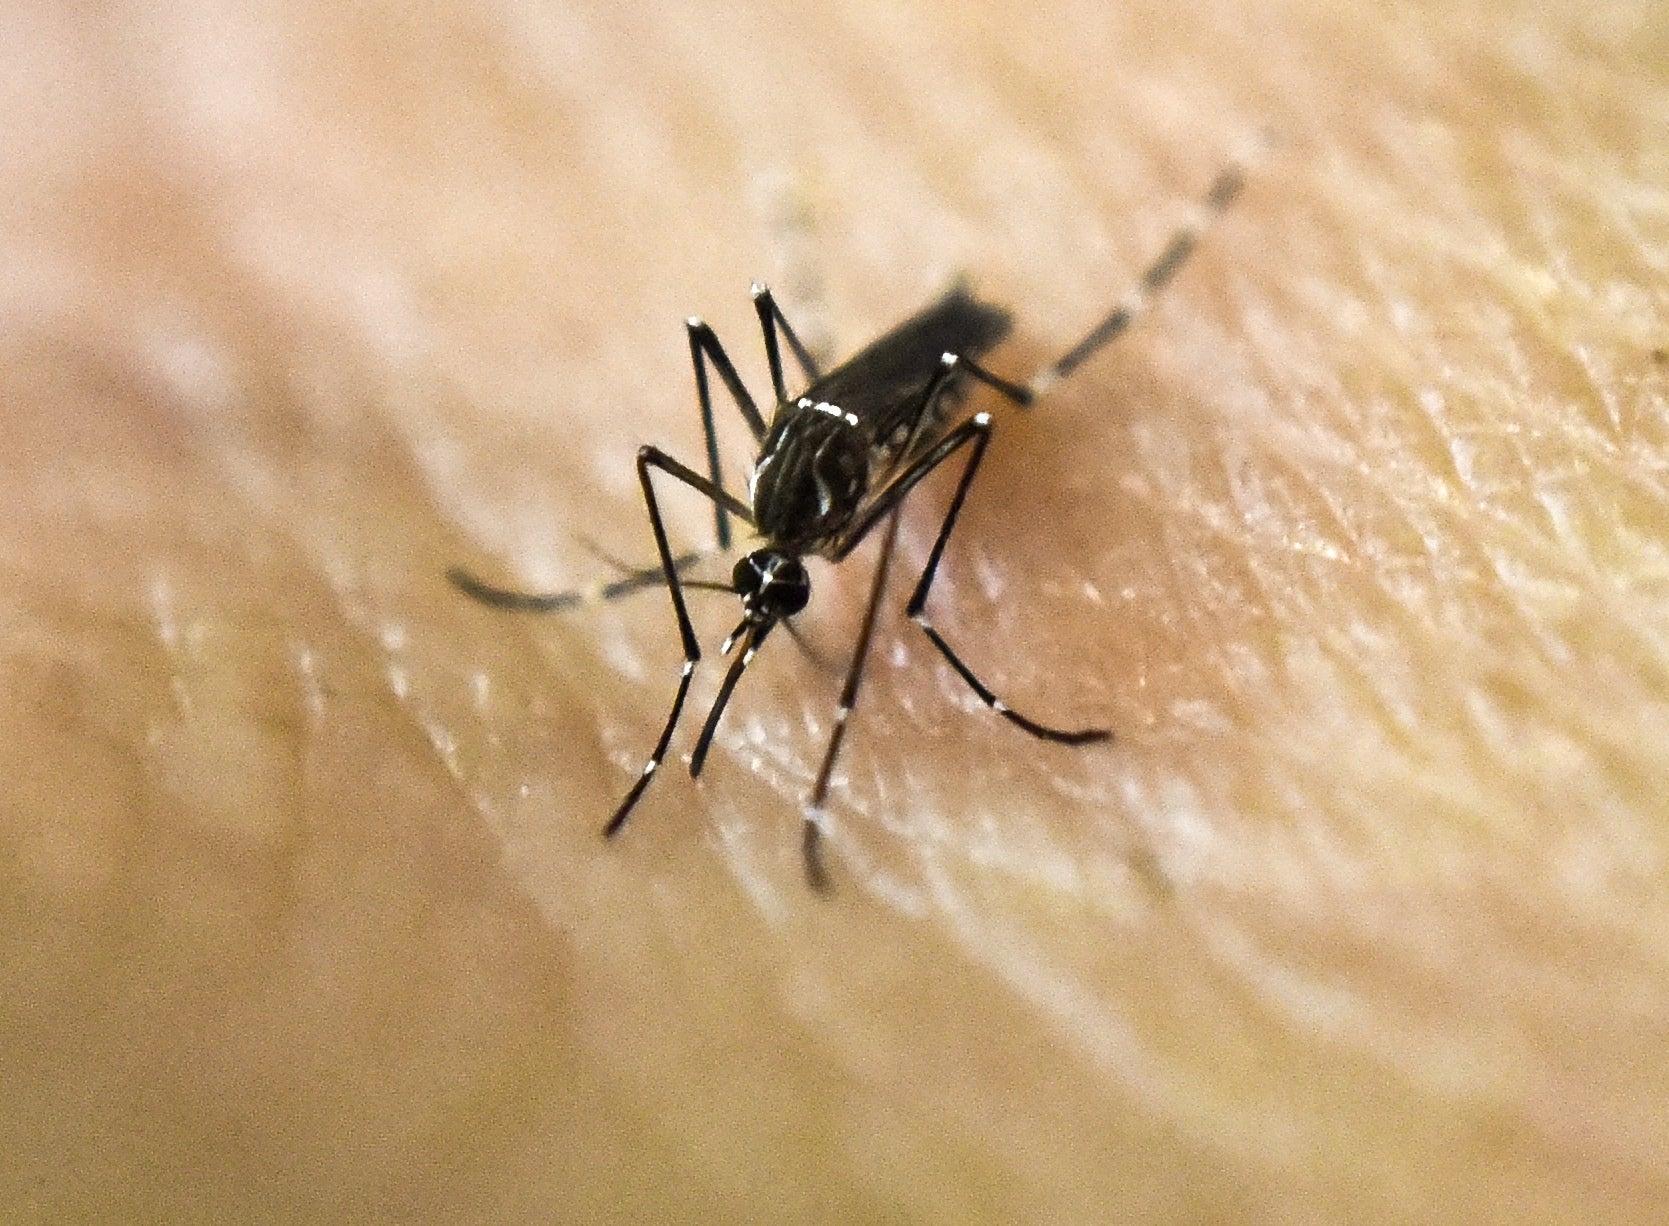 The Aedes Aegypti mosquito spreads Zika, dengue and yellow fever